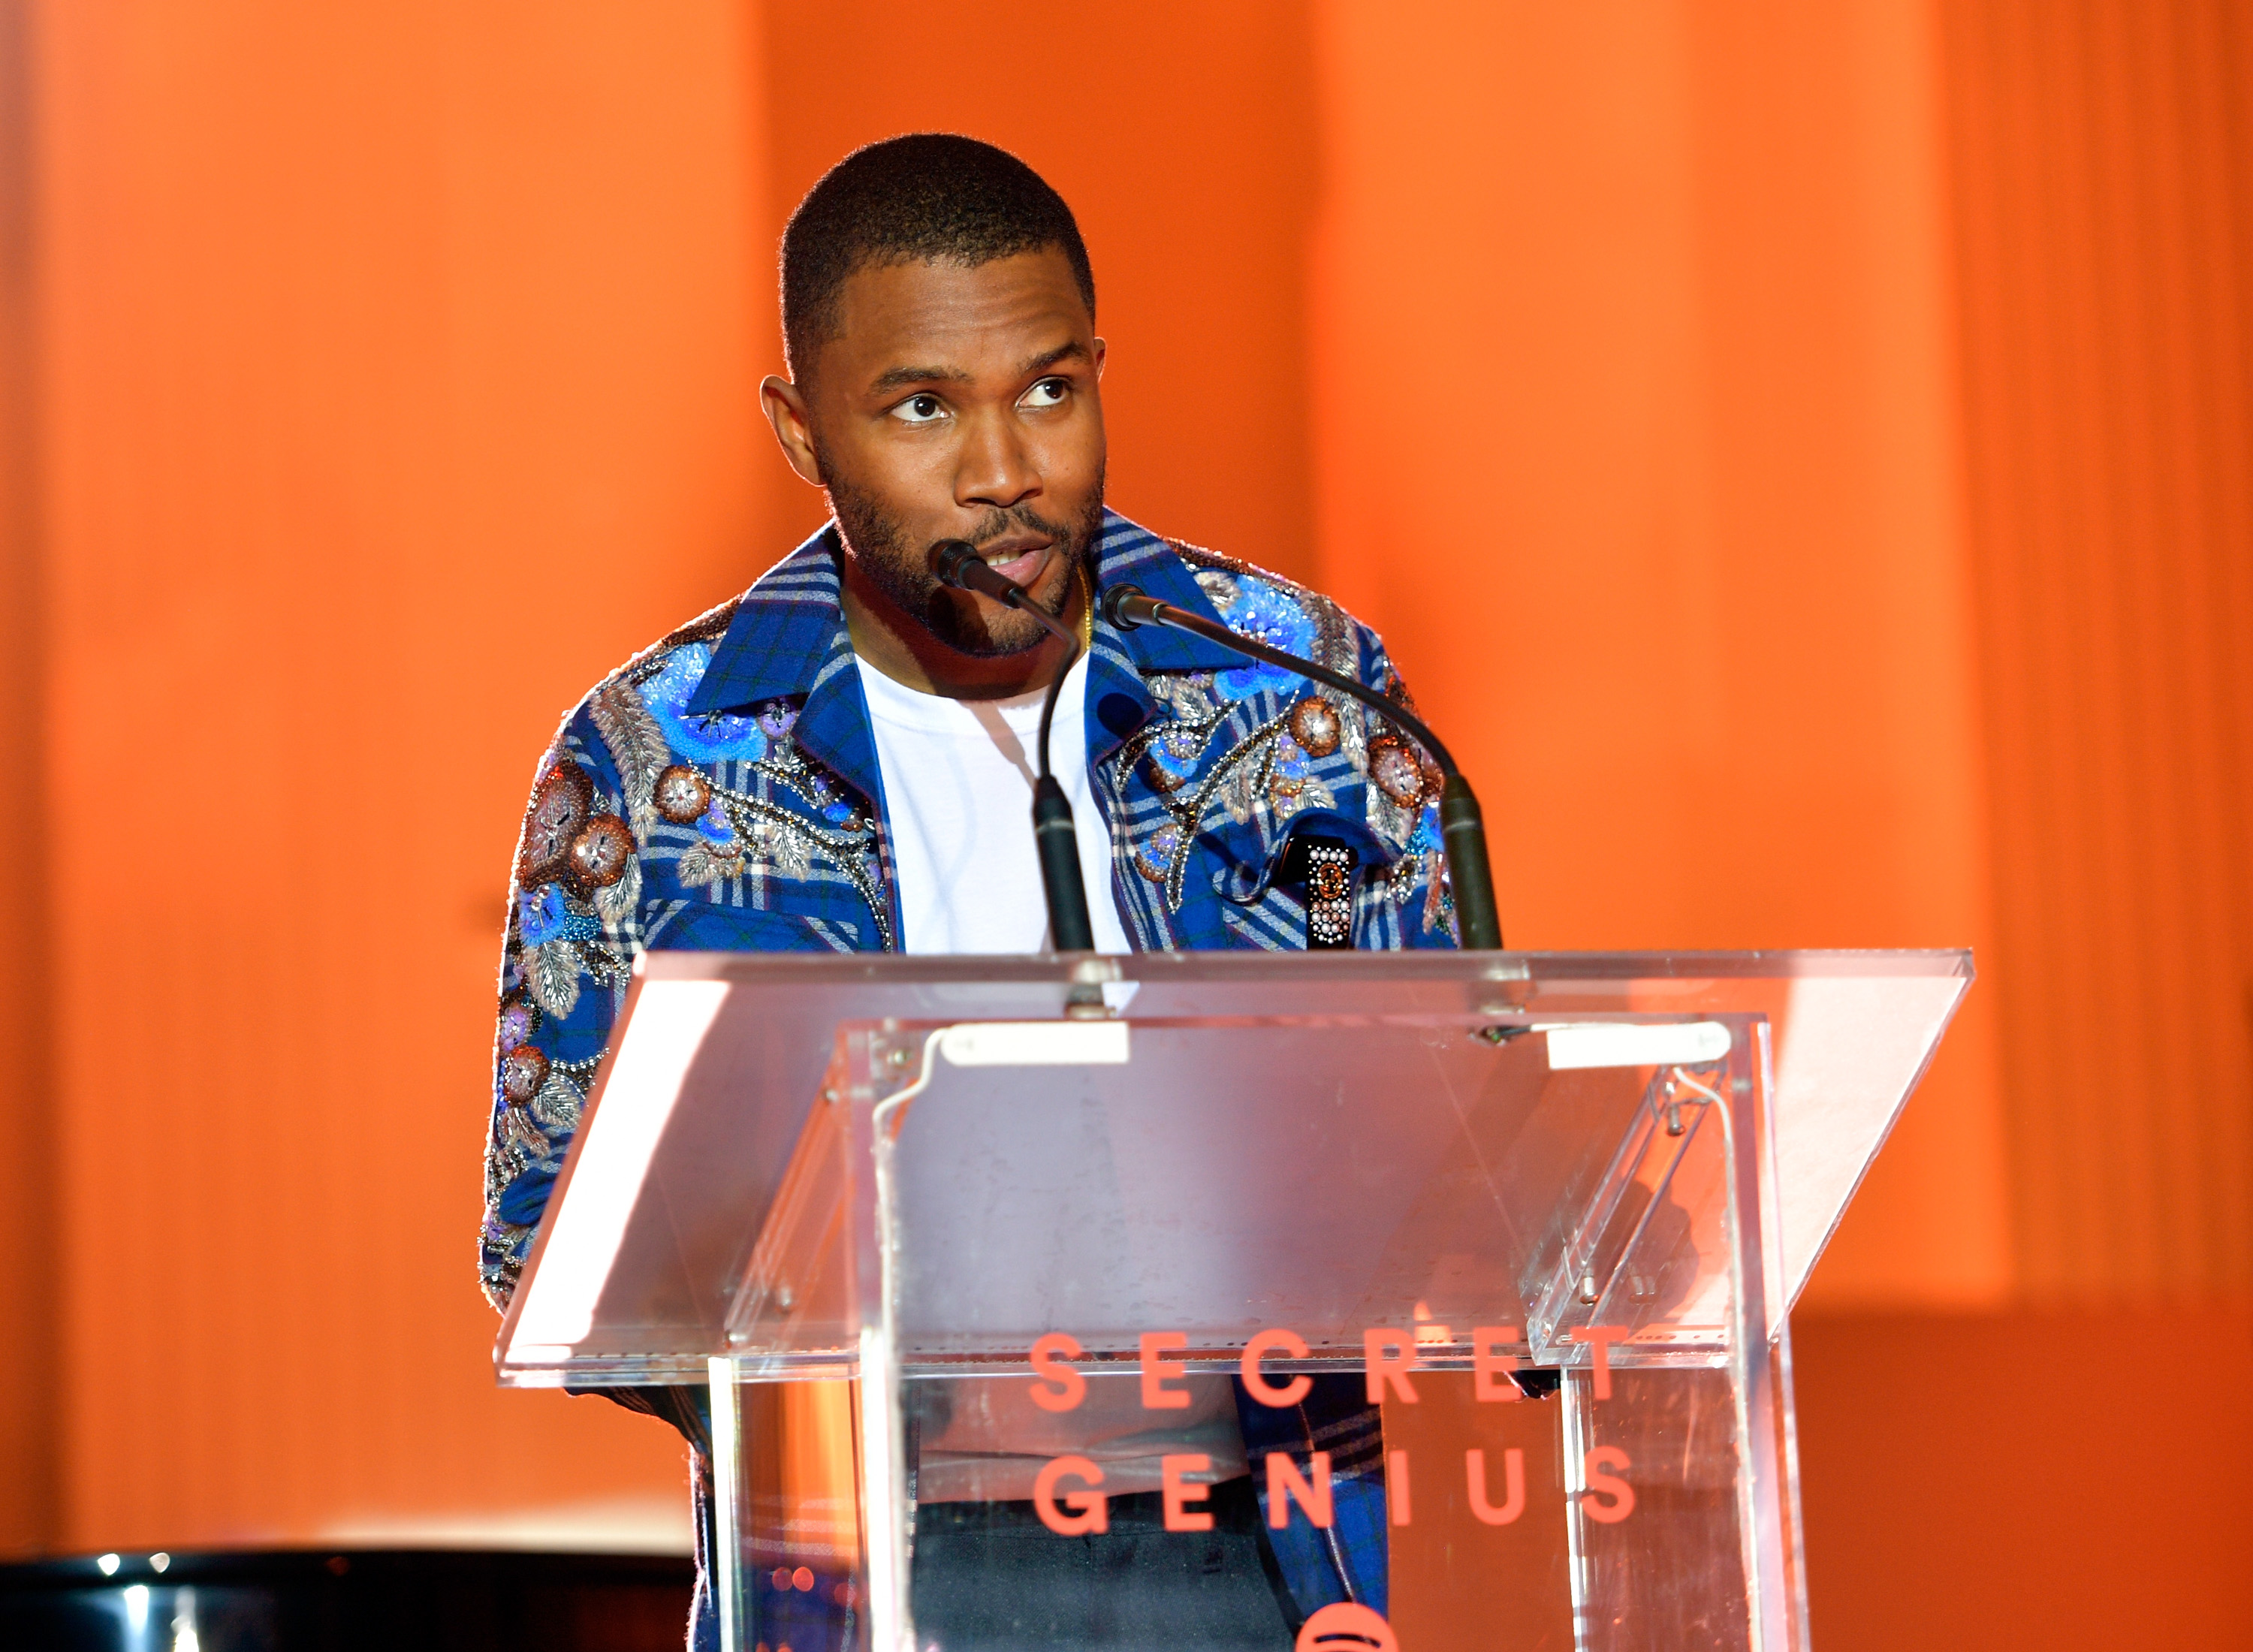 Frank Ocean’s Albums Will Be Analyzed On Spotify’s Acclaimed “Dissect” Podcast